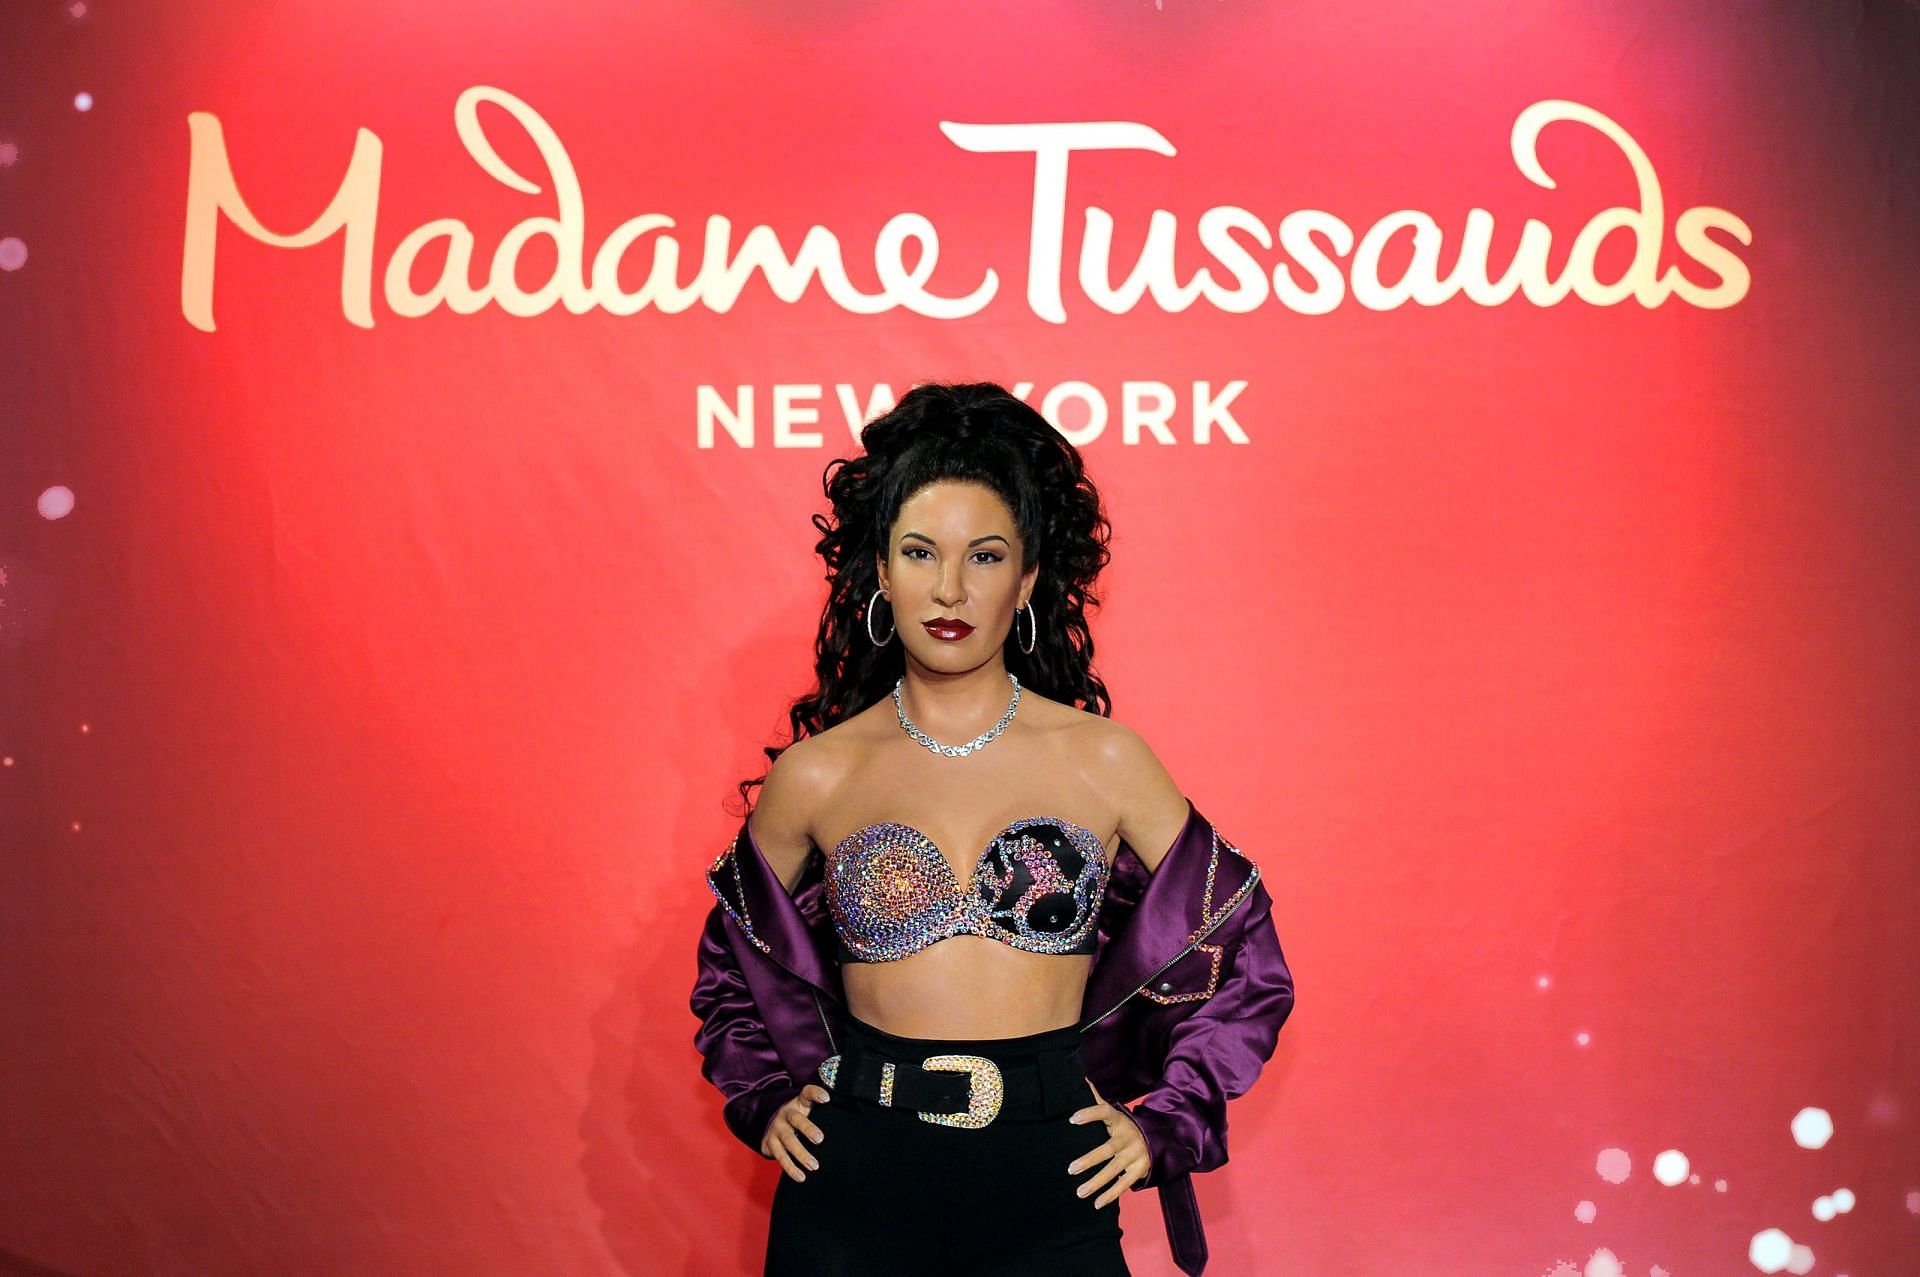 Madame Tussauds New York Hosts Selena Quintanilla&#039;s Sister for Unveiling of Late Singer&#039;s Figure in Times Square. (Photo by Craig Barritt/Getty Images for Madame Tussauds New York)